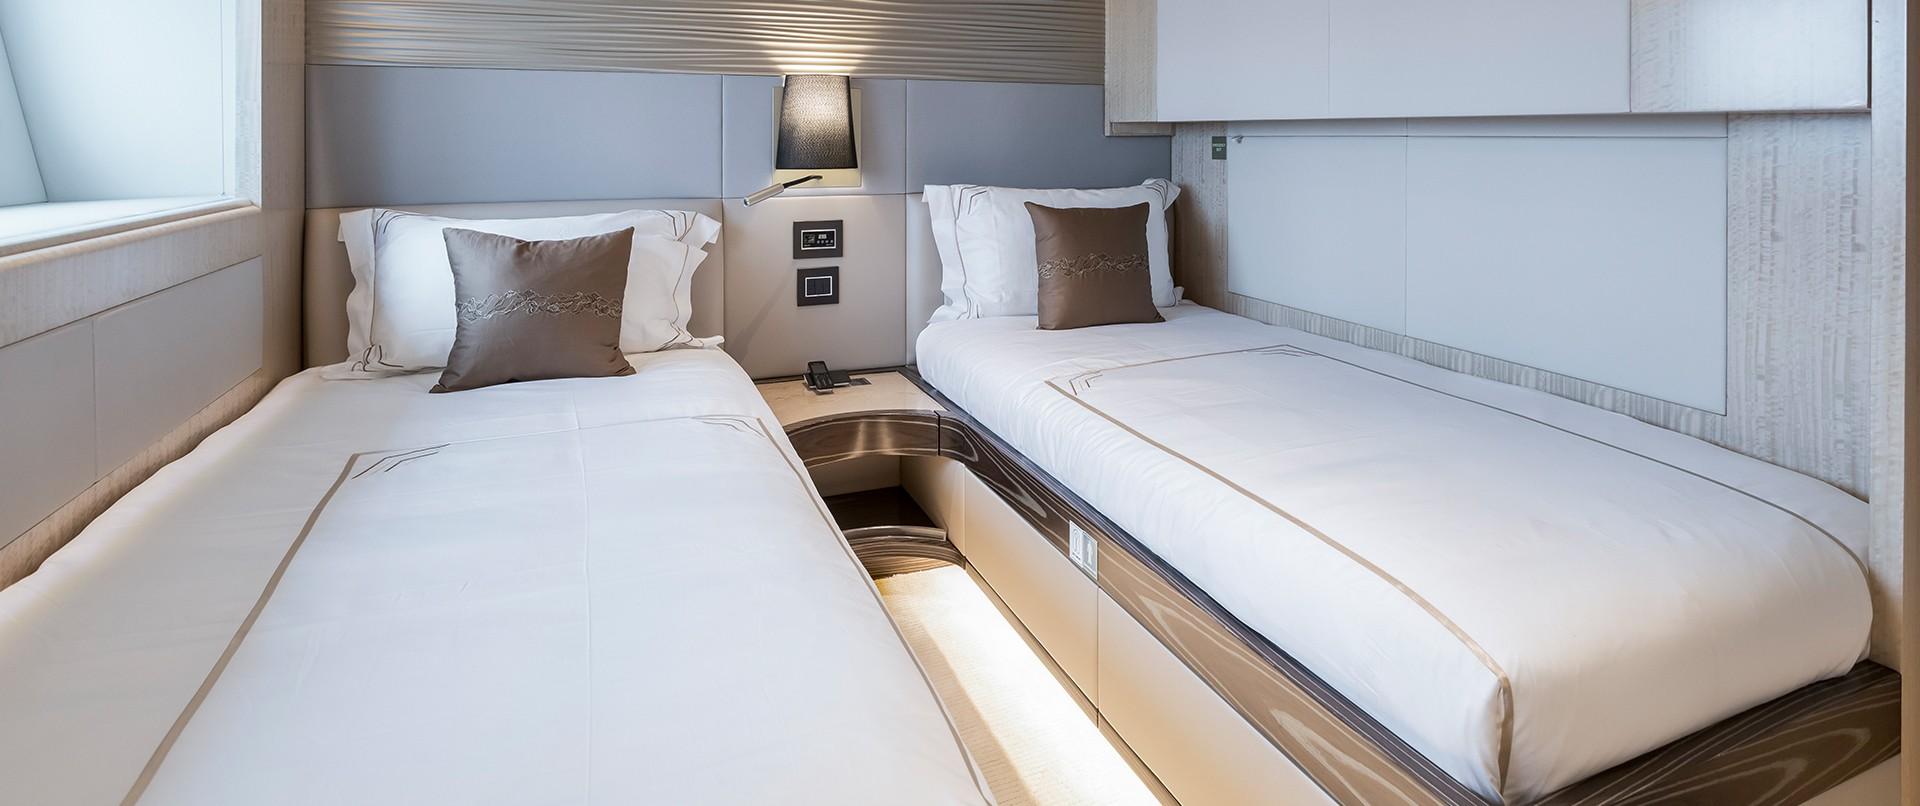 Manufacturer Provided Image: Manufacturer Provided Image: Majesty 100 Twin Cabin